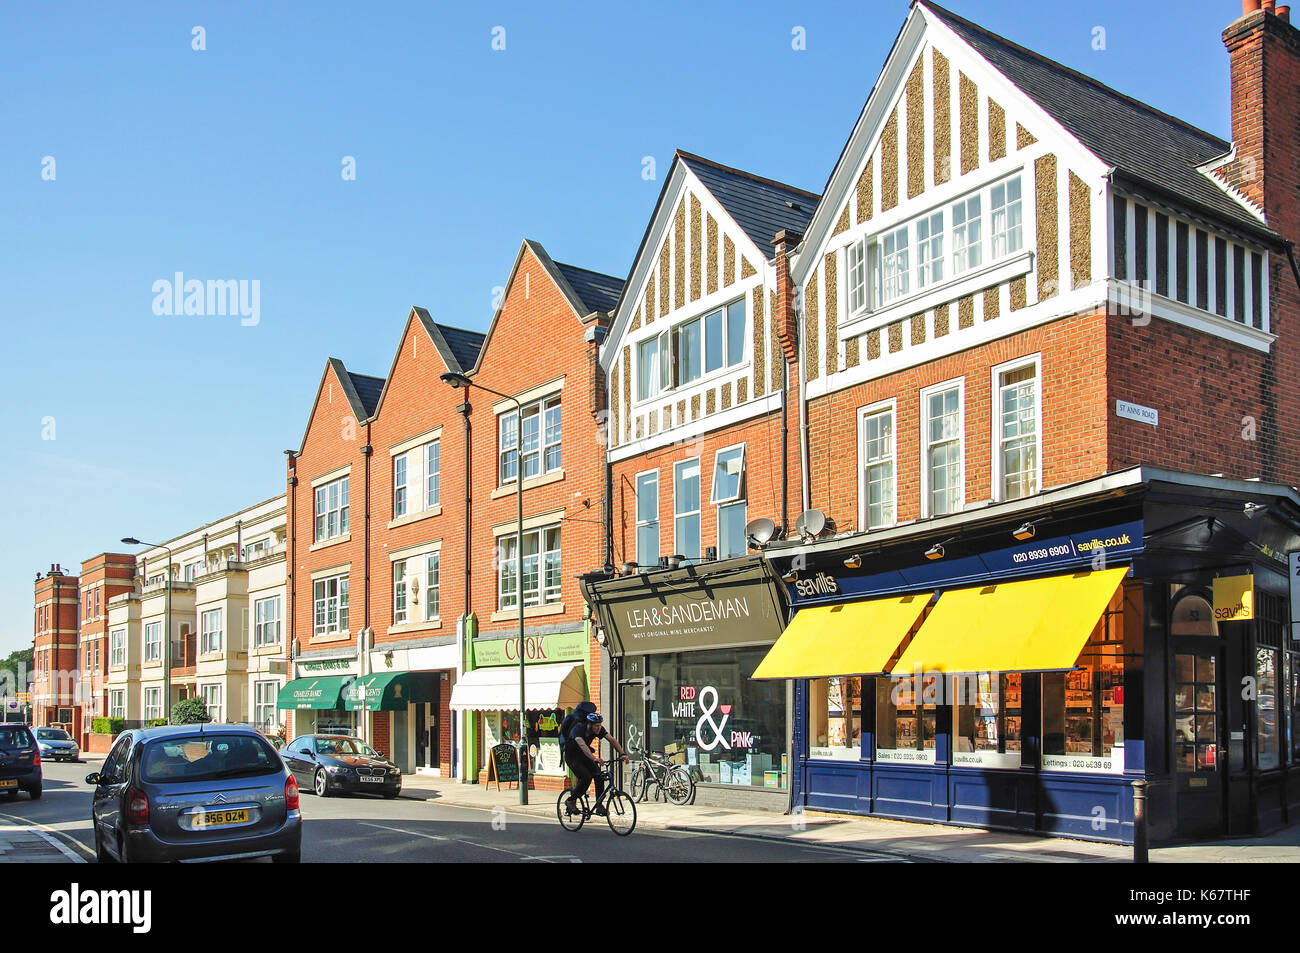 Barnes London High Street High Resolution Stock Photography And Images Alamy